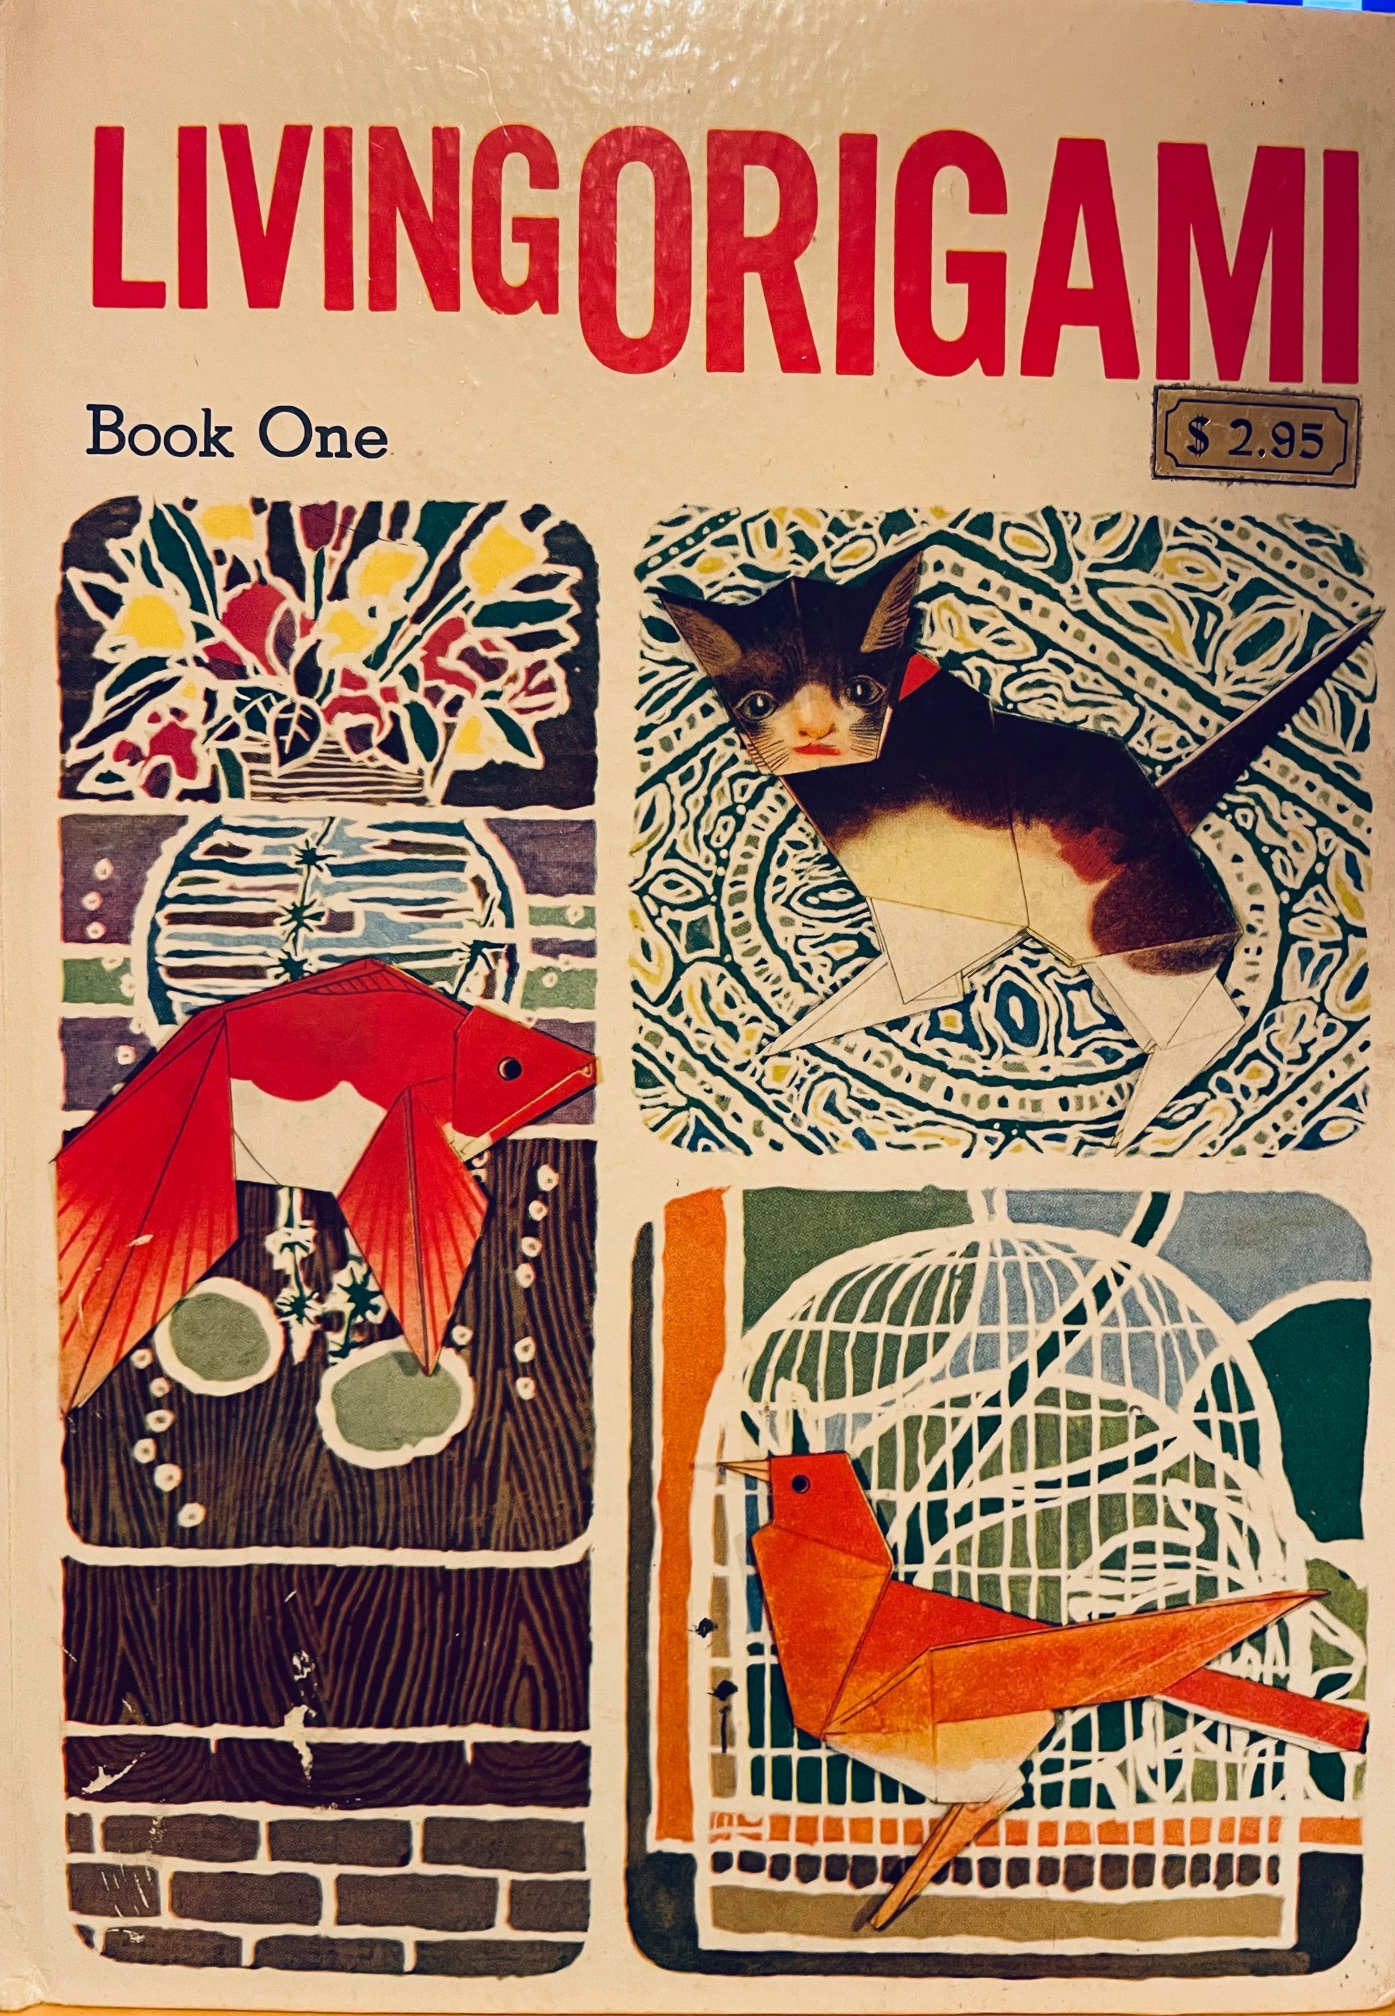 Living Origami, Book One